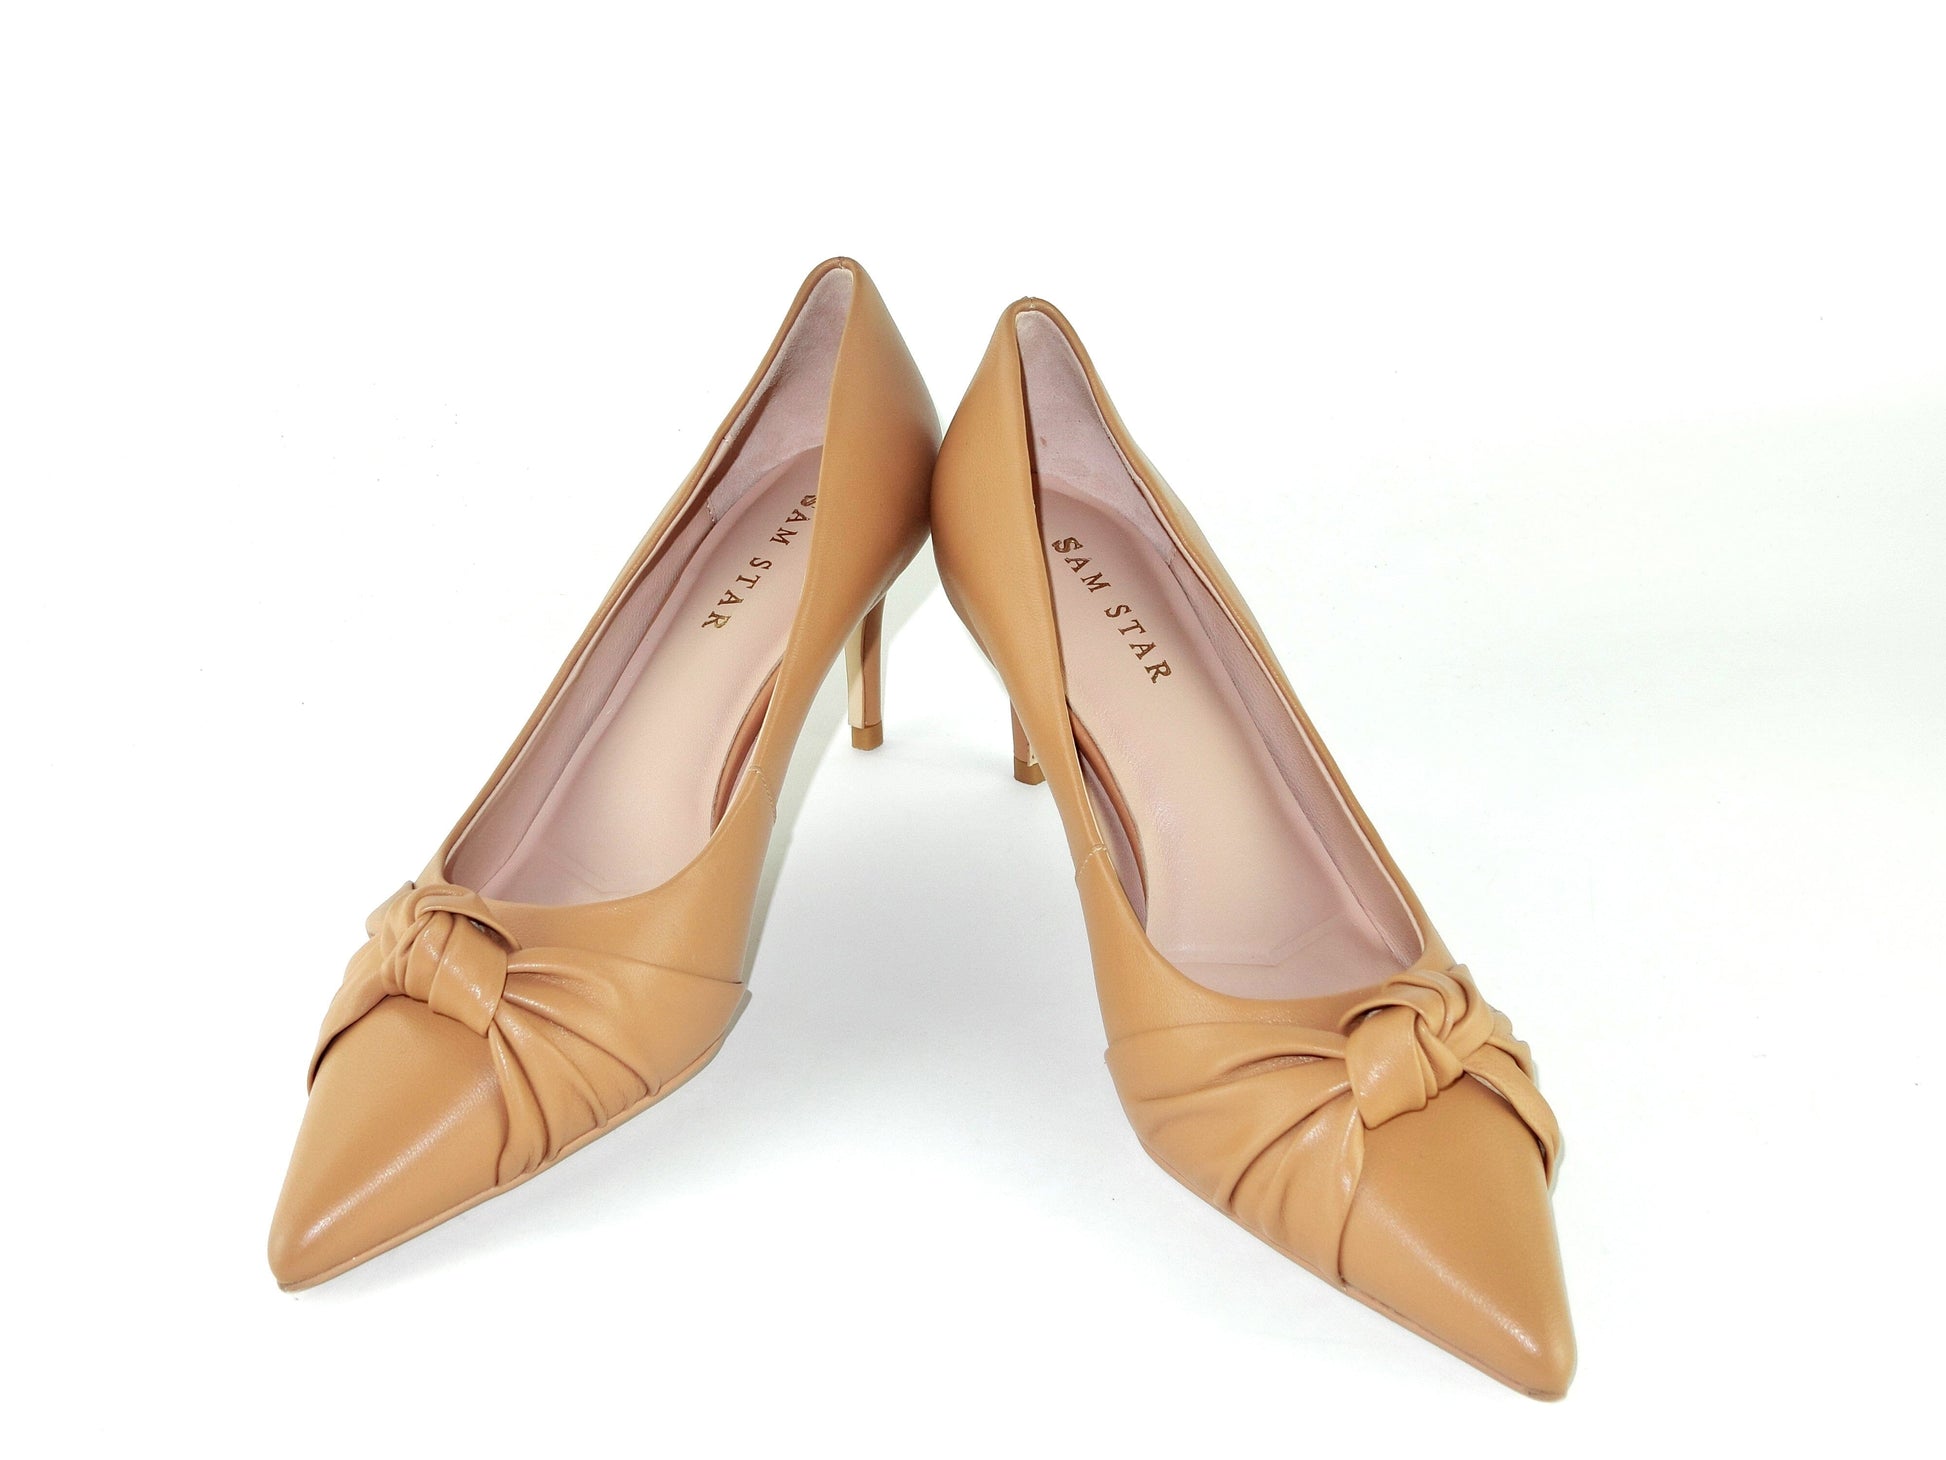 SS23004 Leather court shoes with knot design - Black and Tan ladies shoes Sam Star shoes Tan 36/3 